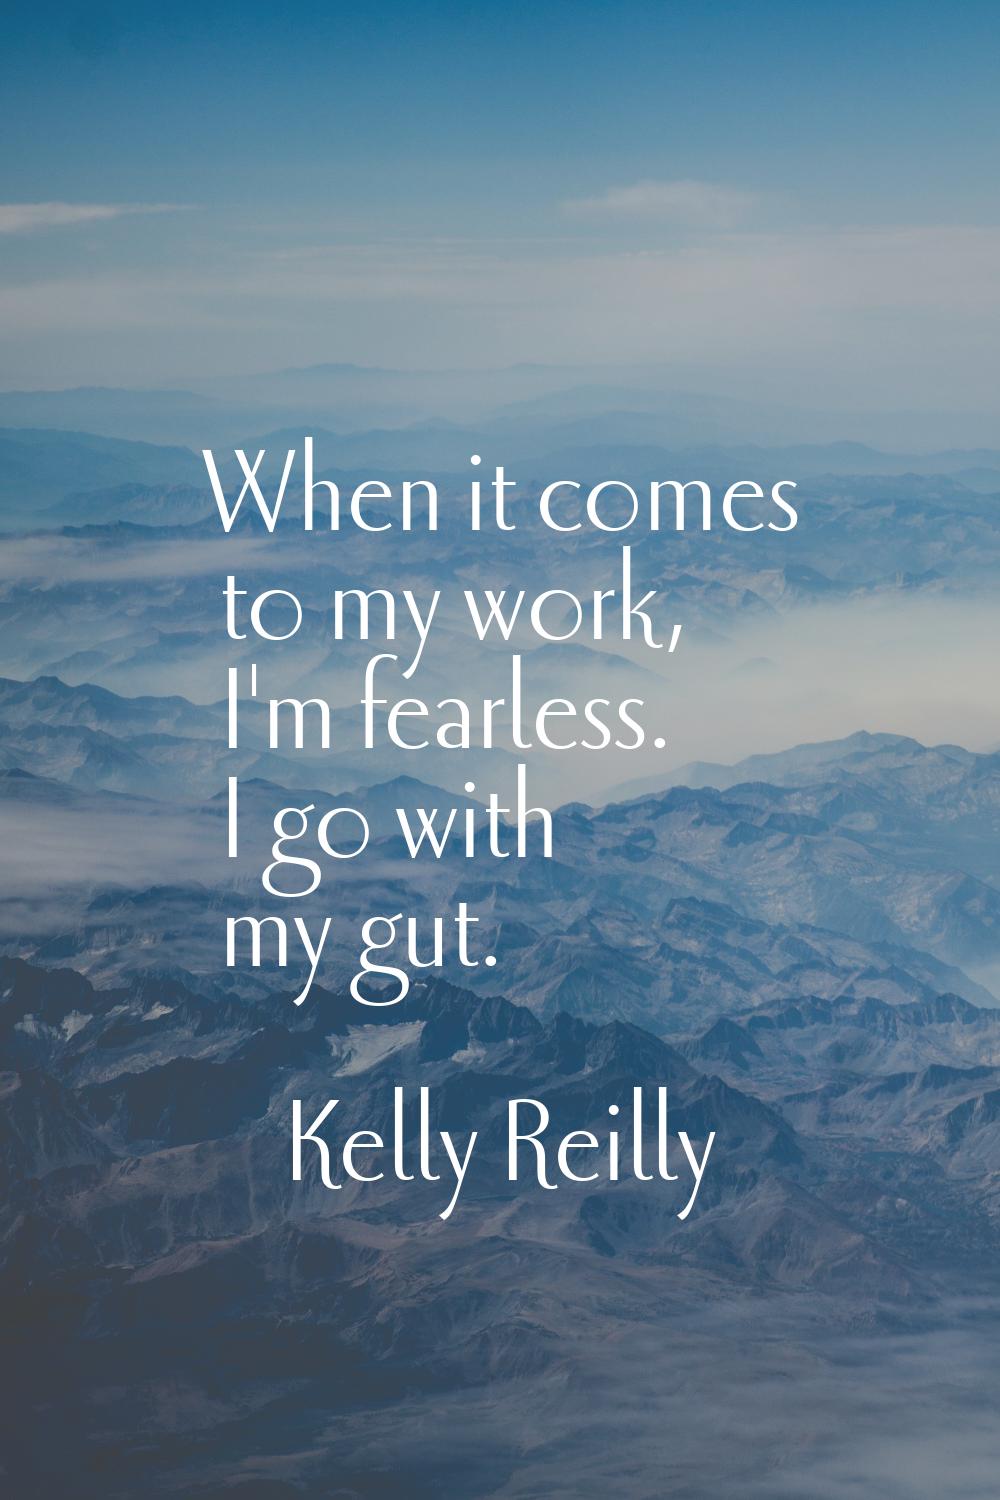 When it comes to my work, I'm fearless. I go with my gut.